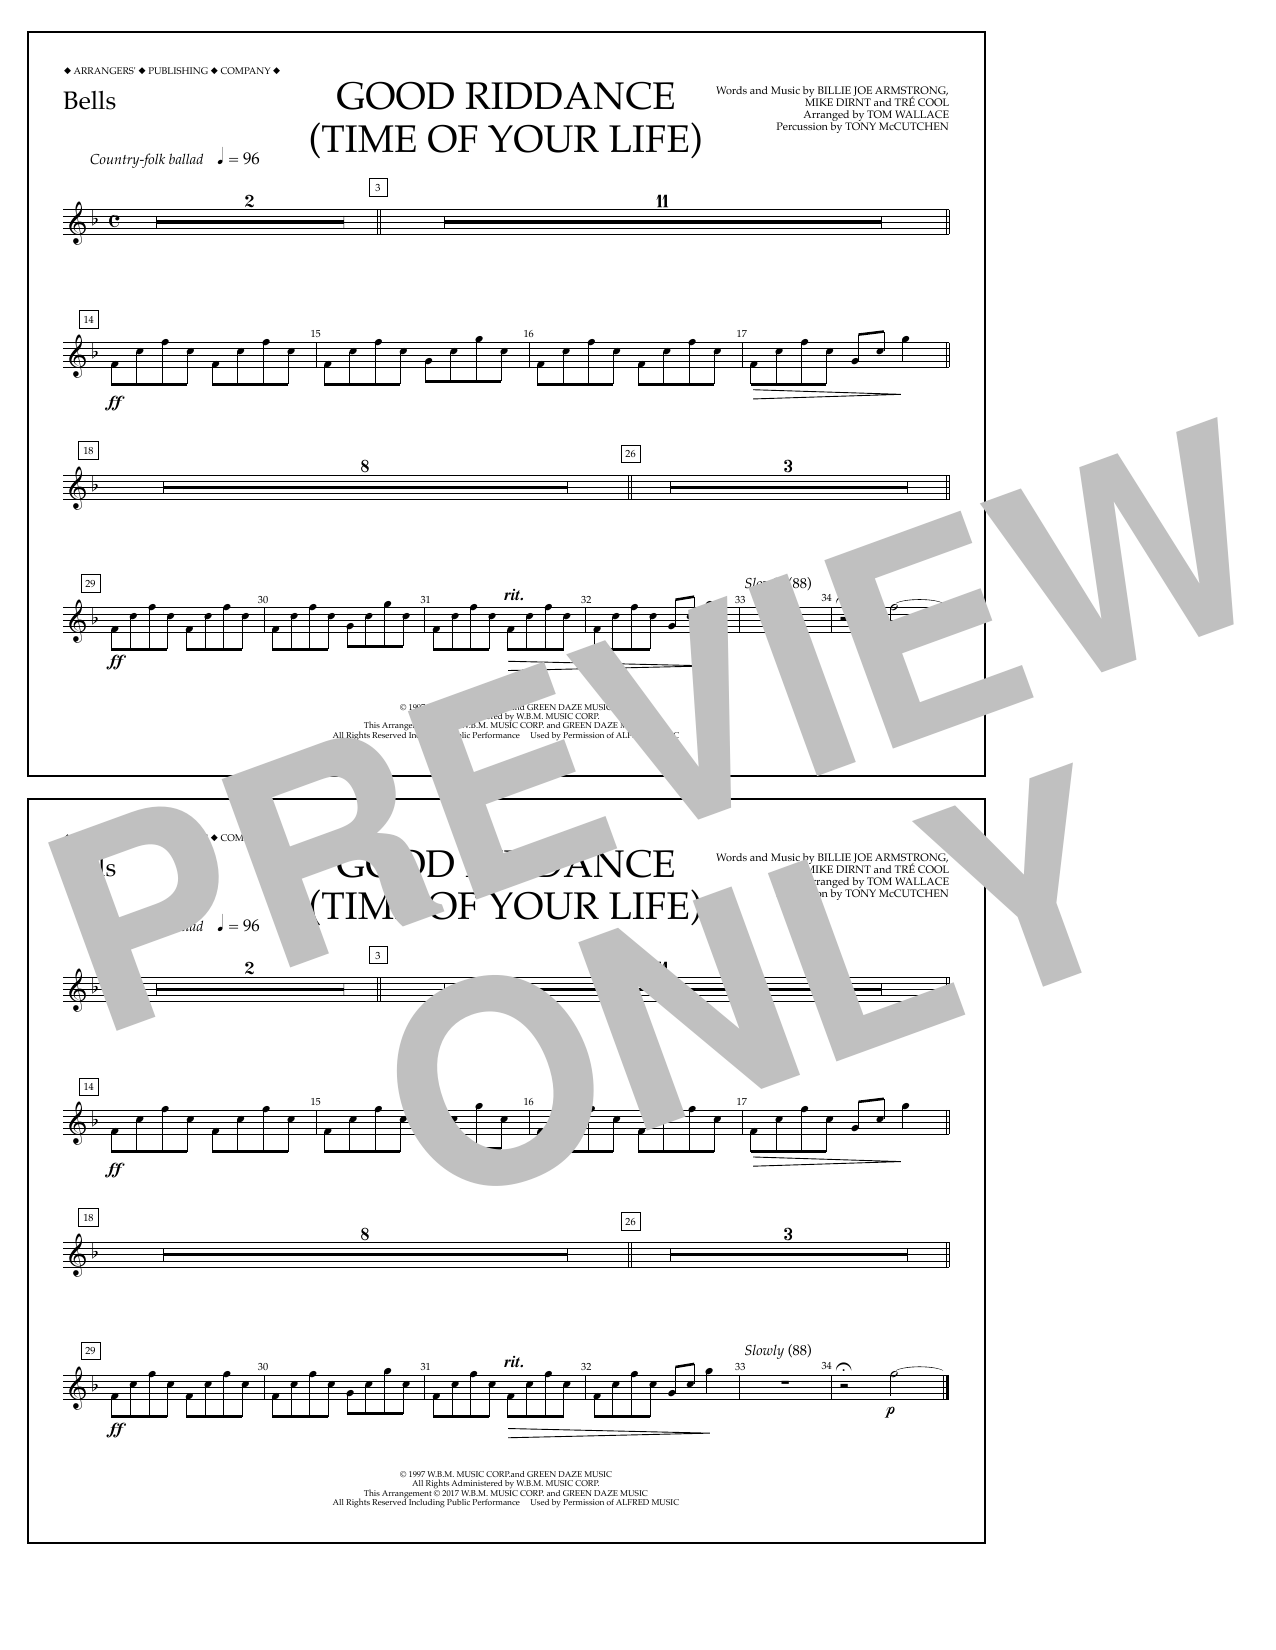 Download Tom Wallace Good Riddance (Time of Your Life) - Bel Sheet Music